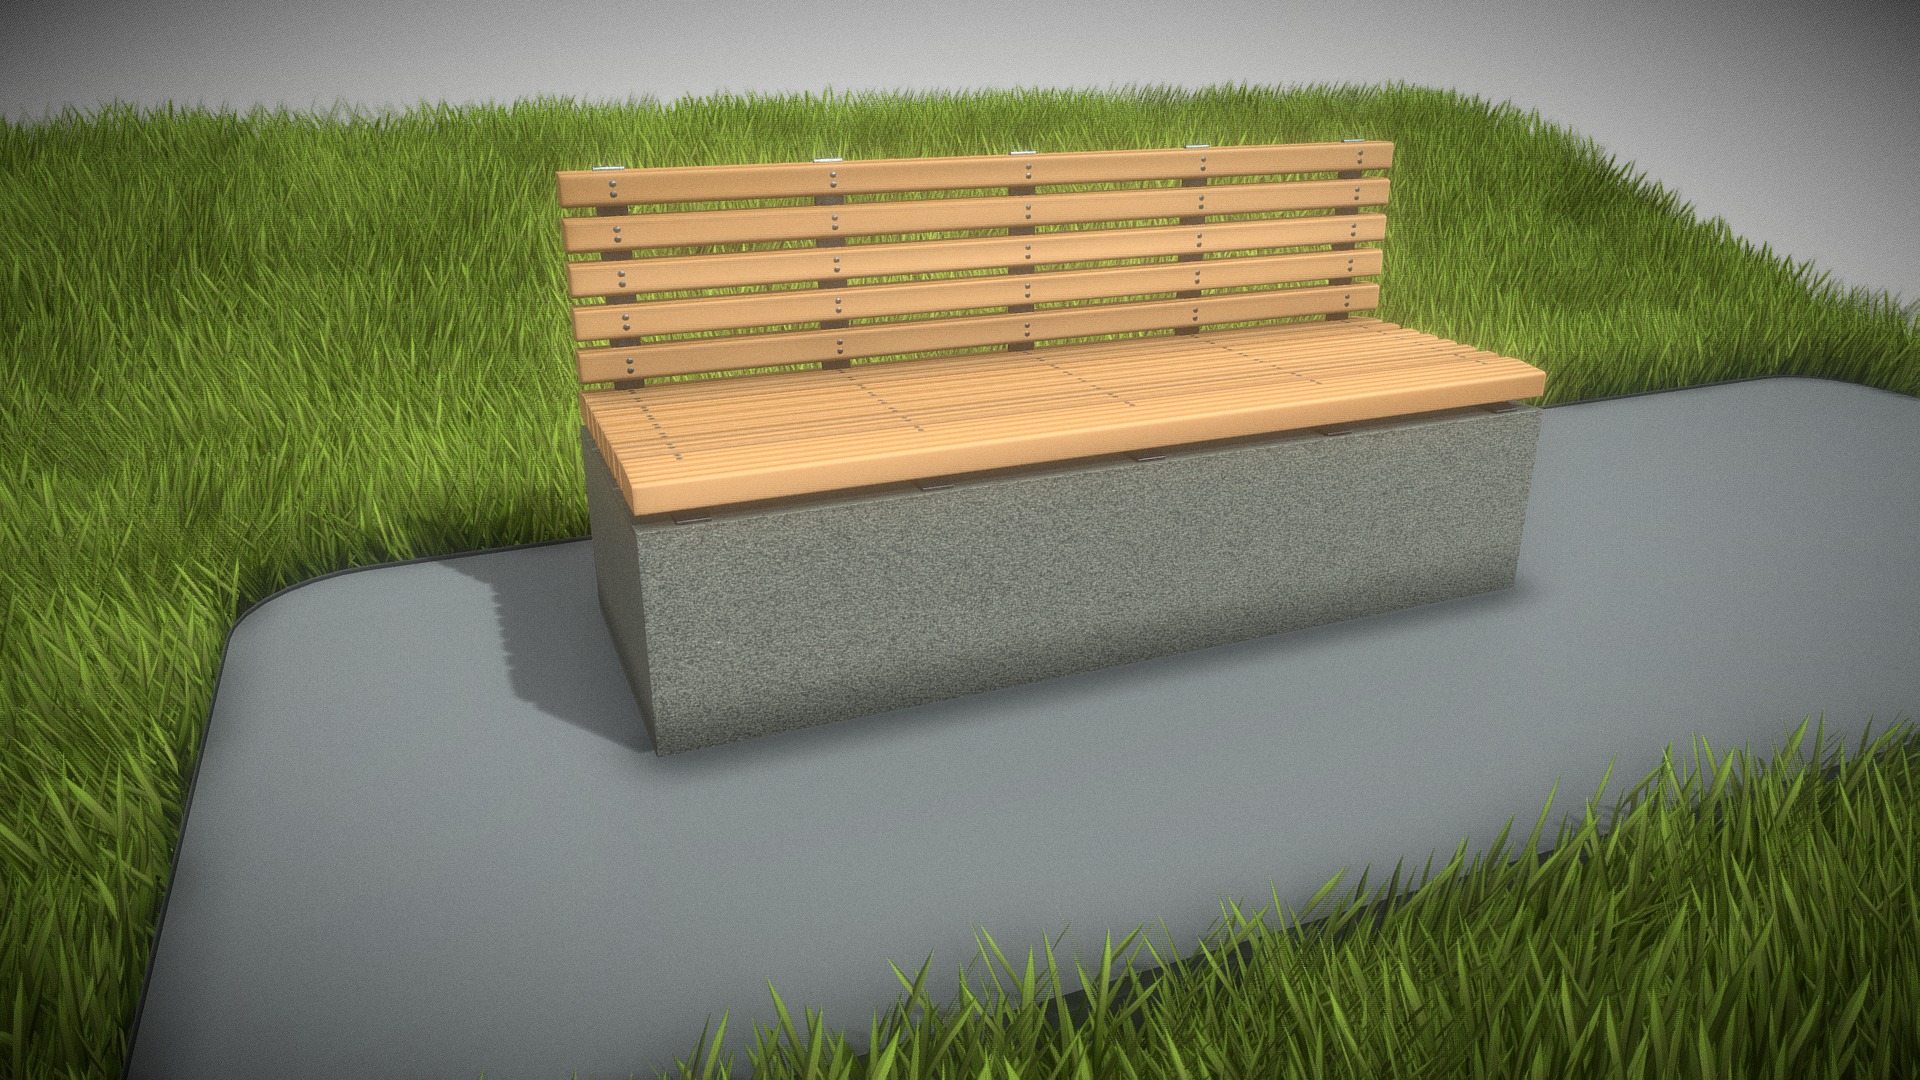 3D model Park Bench [4] Version 2 - This is a 3D model of the Park Bench [4] Version 2. The 3D model is about a wooden bench on a stone slab.